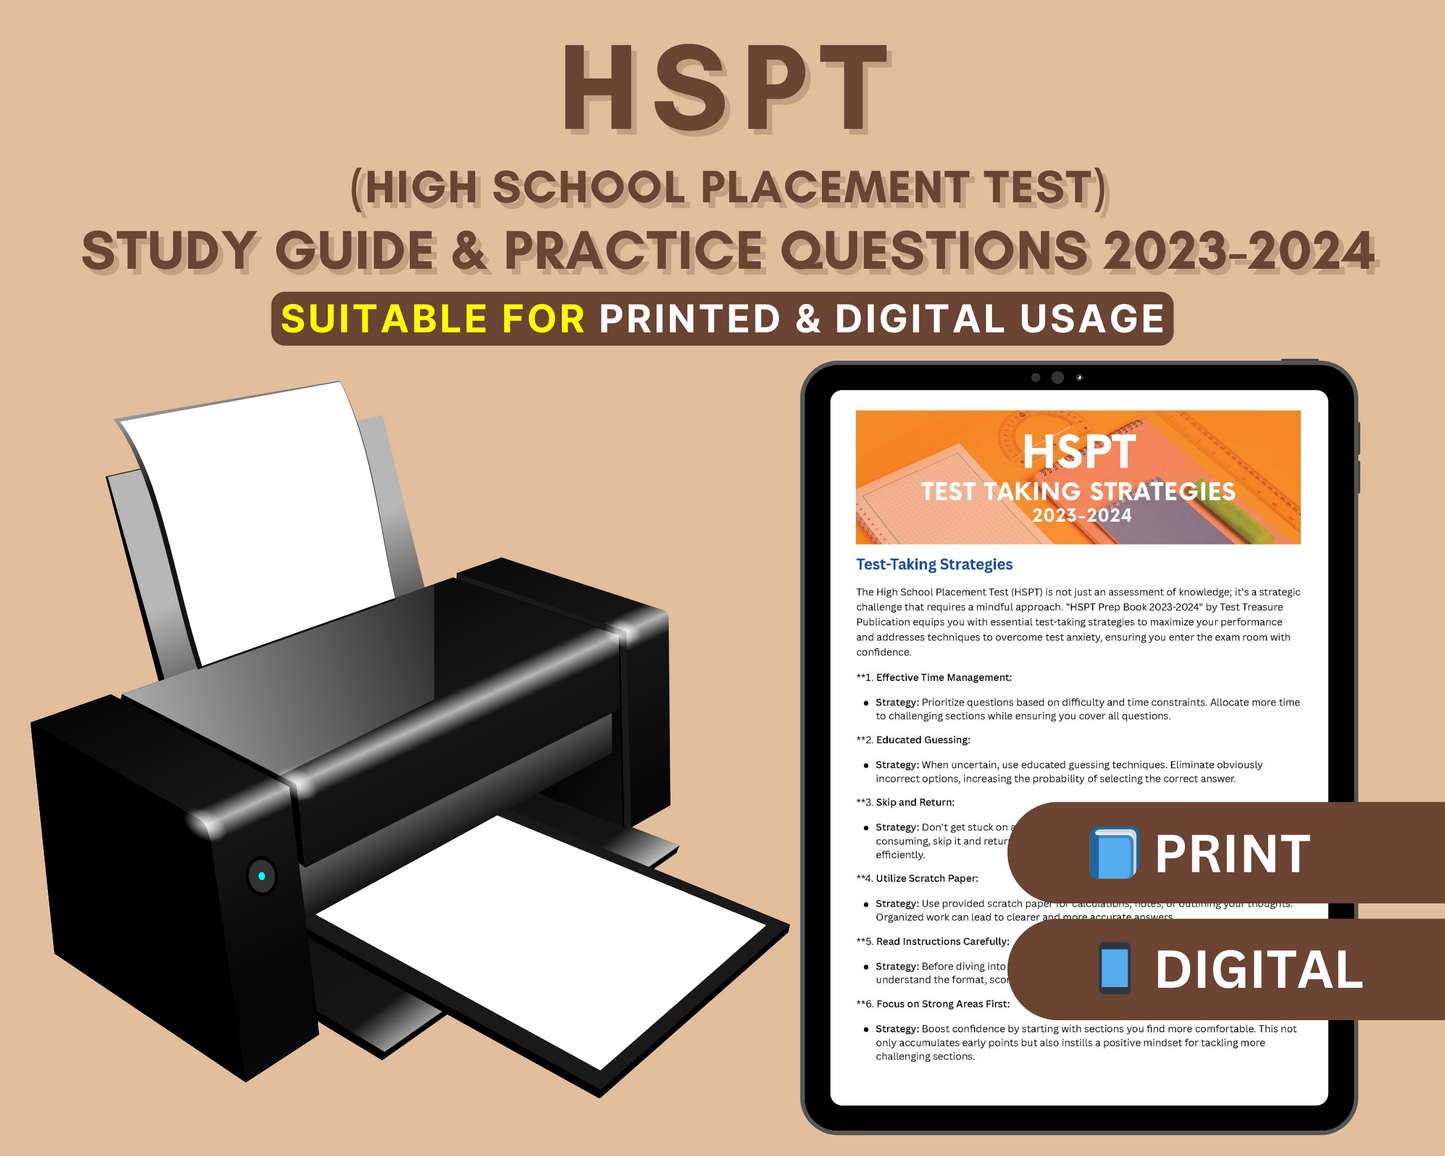 HSPT Prep Study Guide 2023-24: In-Depth Content Review, Practice Tests & Exam Strategies for High School Placement Test